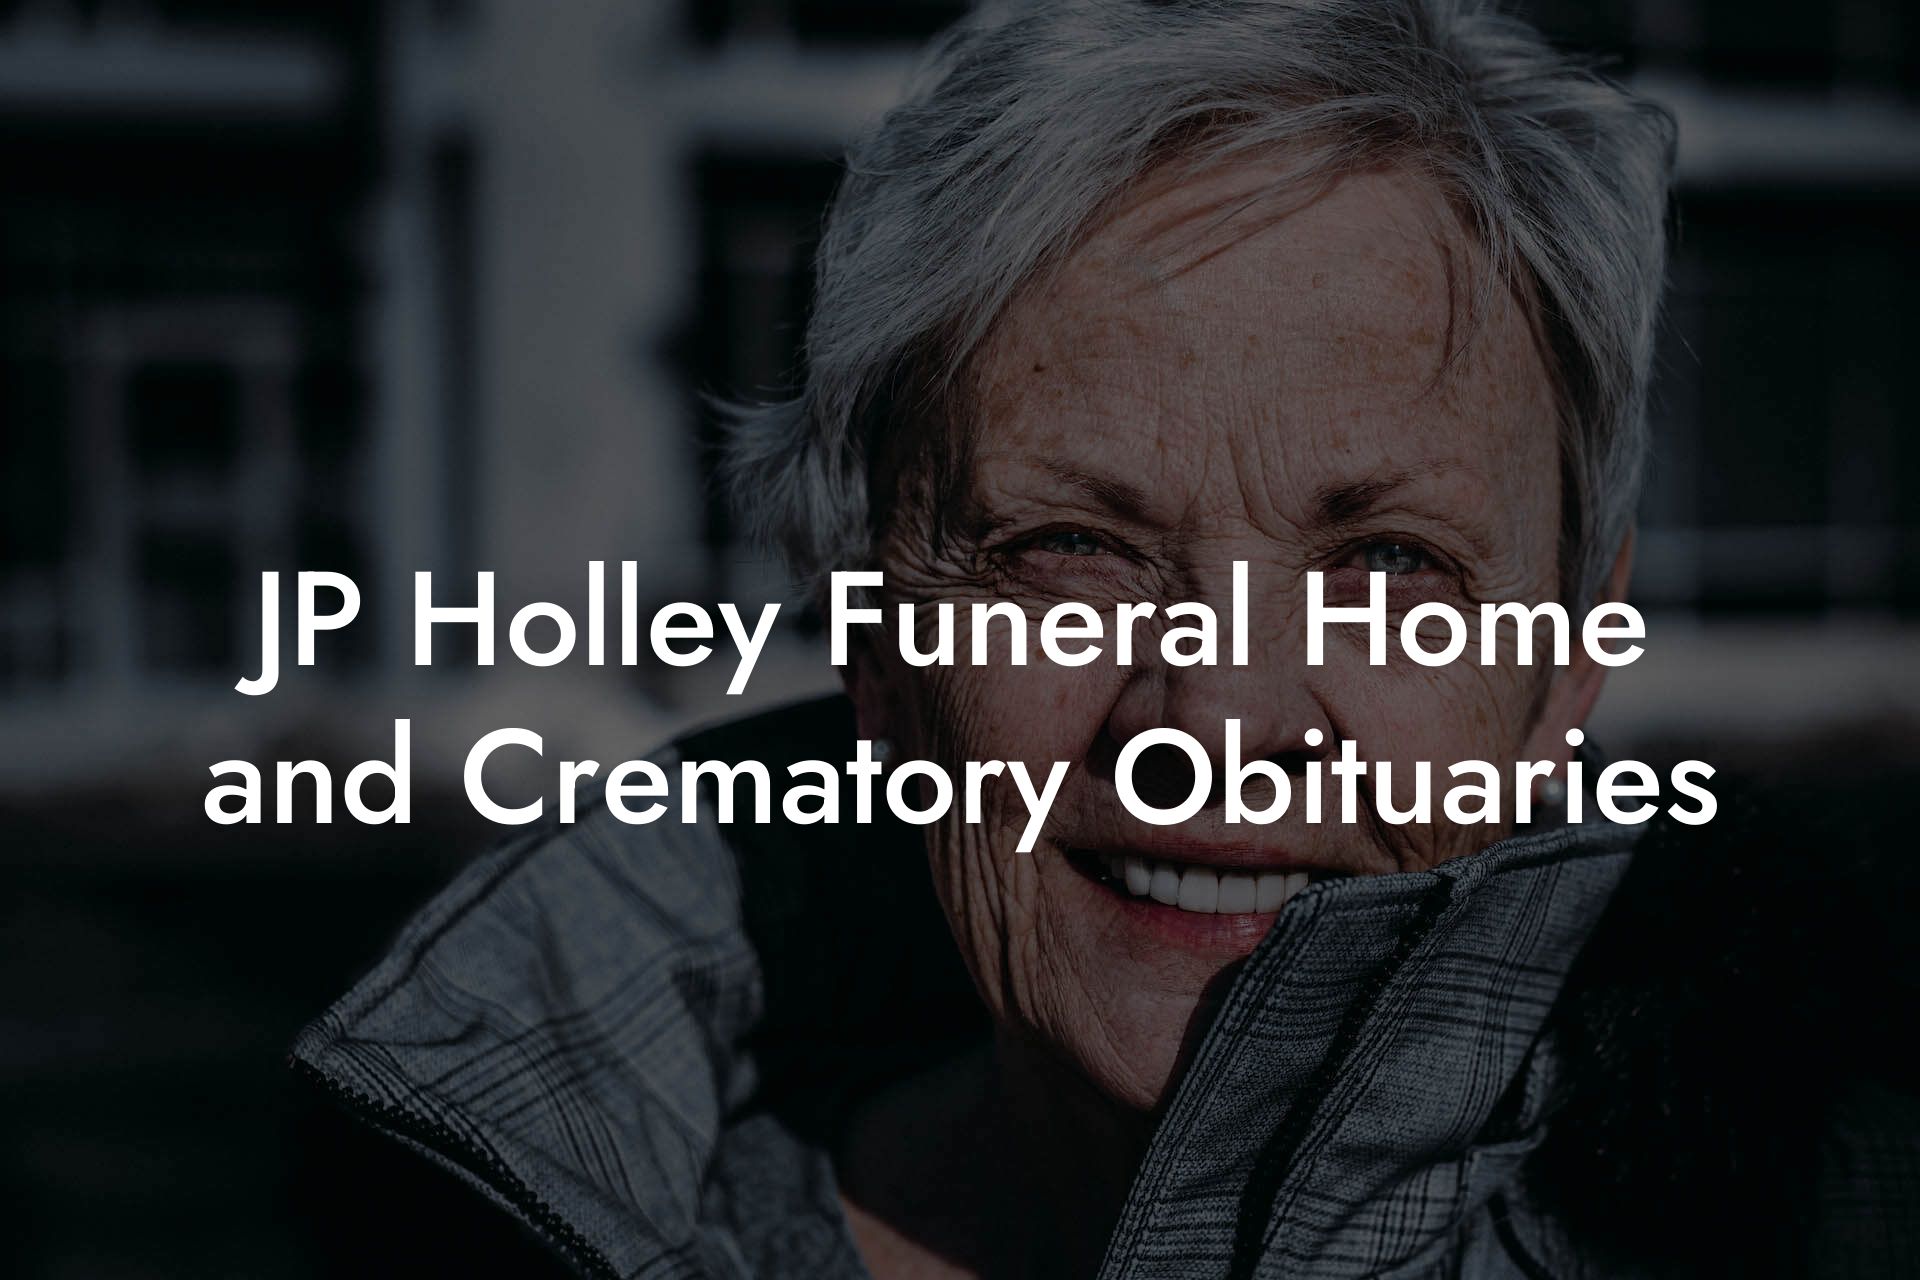 JP Holley Funeral Home and Crematory Obituaries